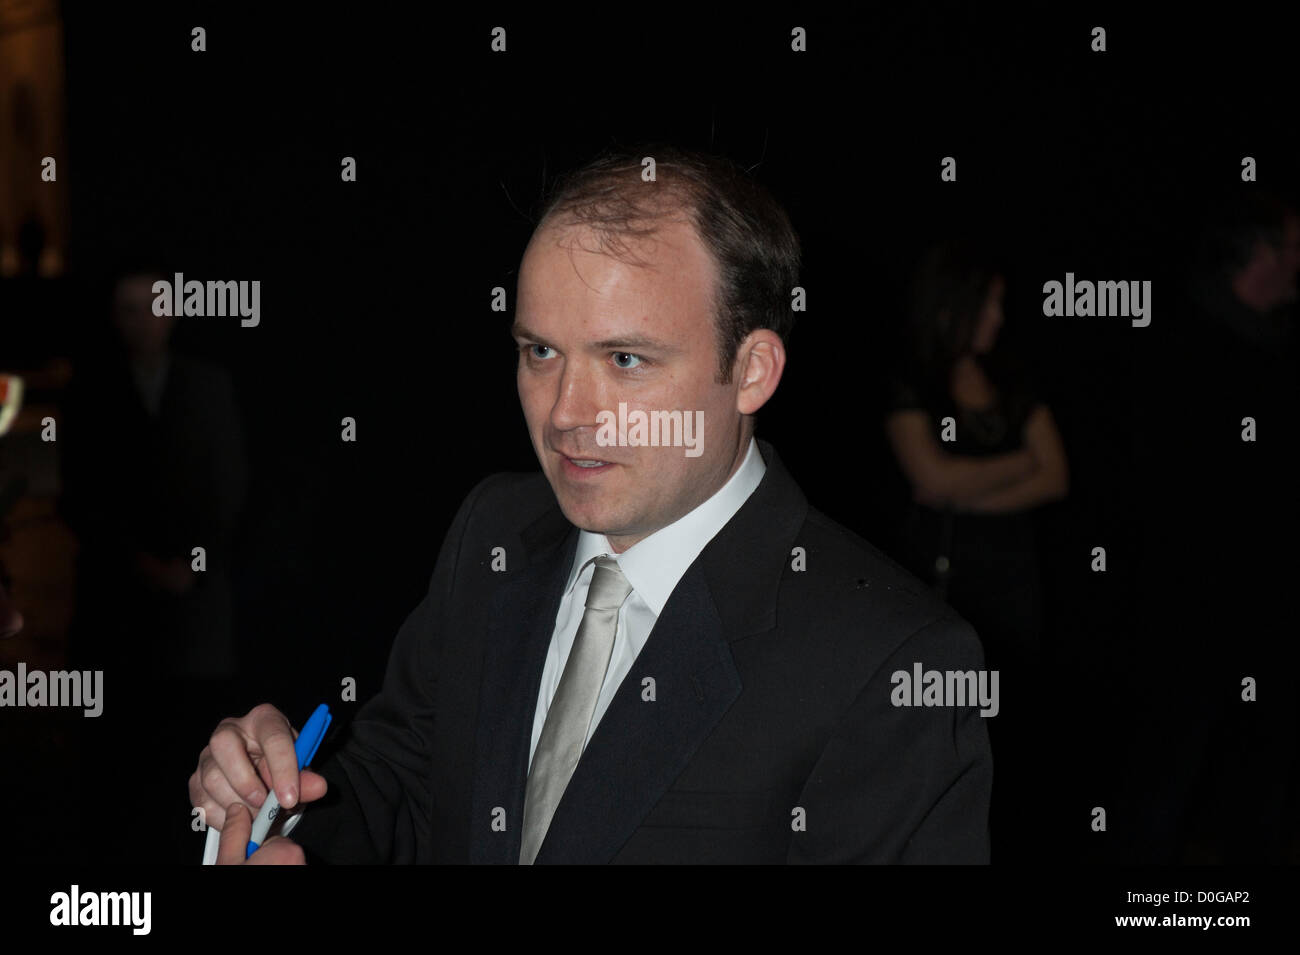 Rory Kinnear at Evening Standard Theatre Awards 2012, The Savoy, London 25th November 2012 British actor Stock Photo